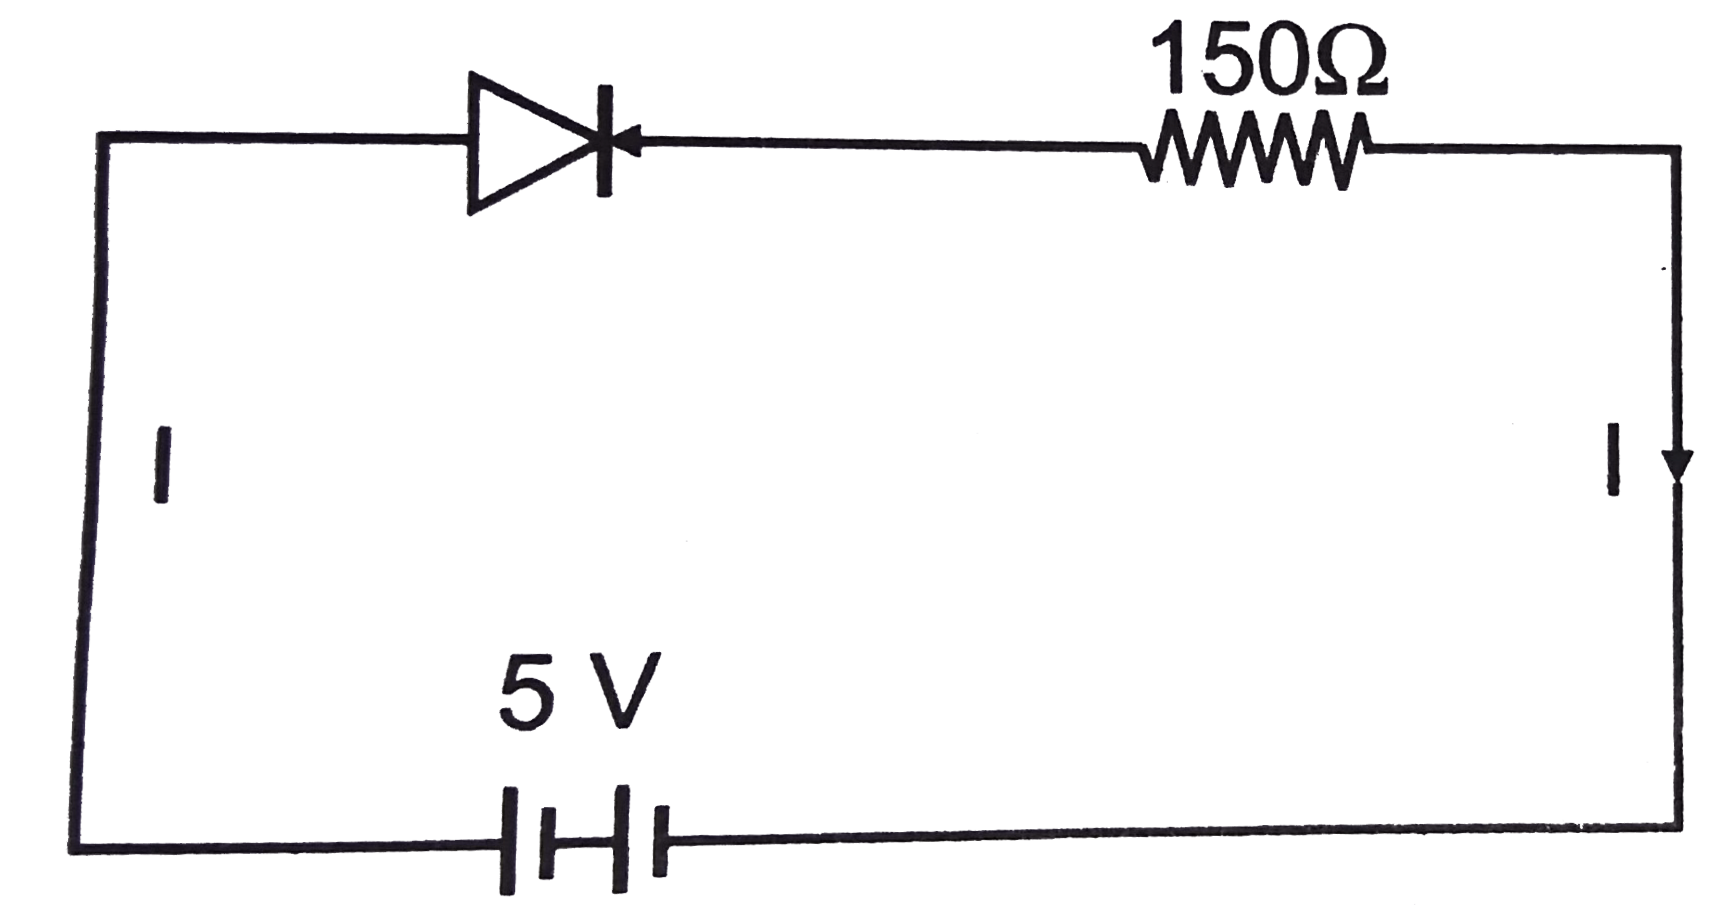 The potential barrier developed in the diode of figure is 0.5 V. The current in the diode is current in the diode is